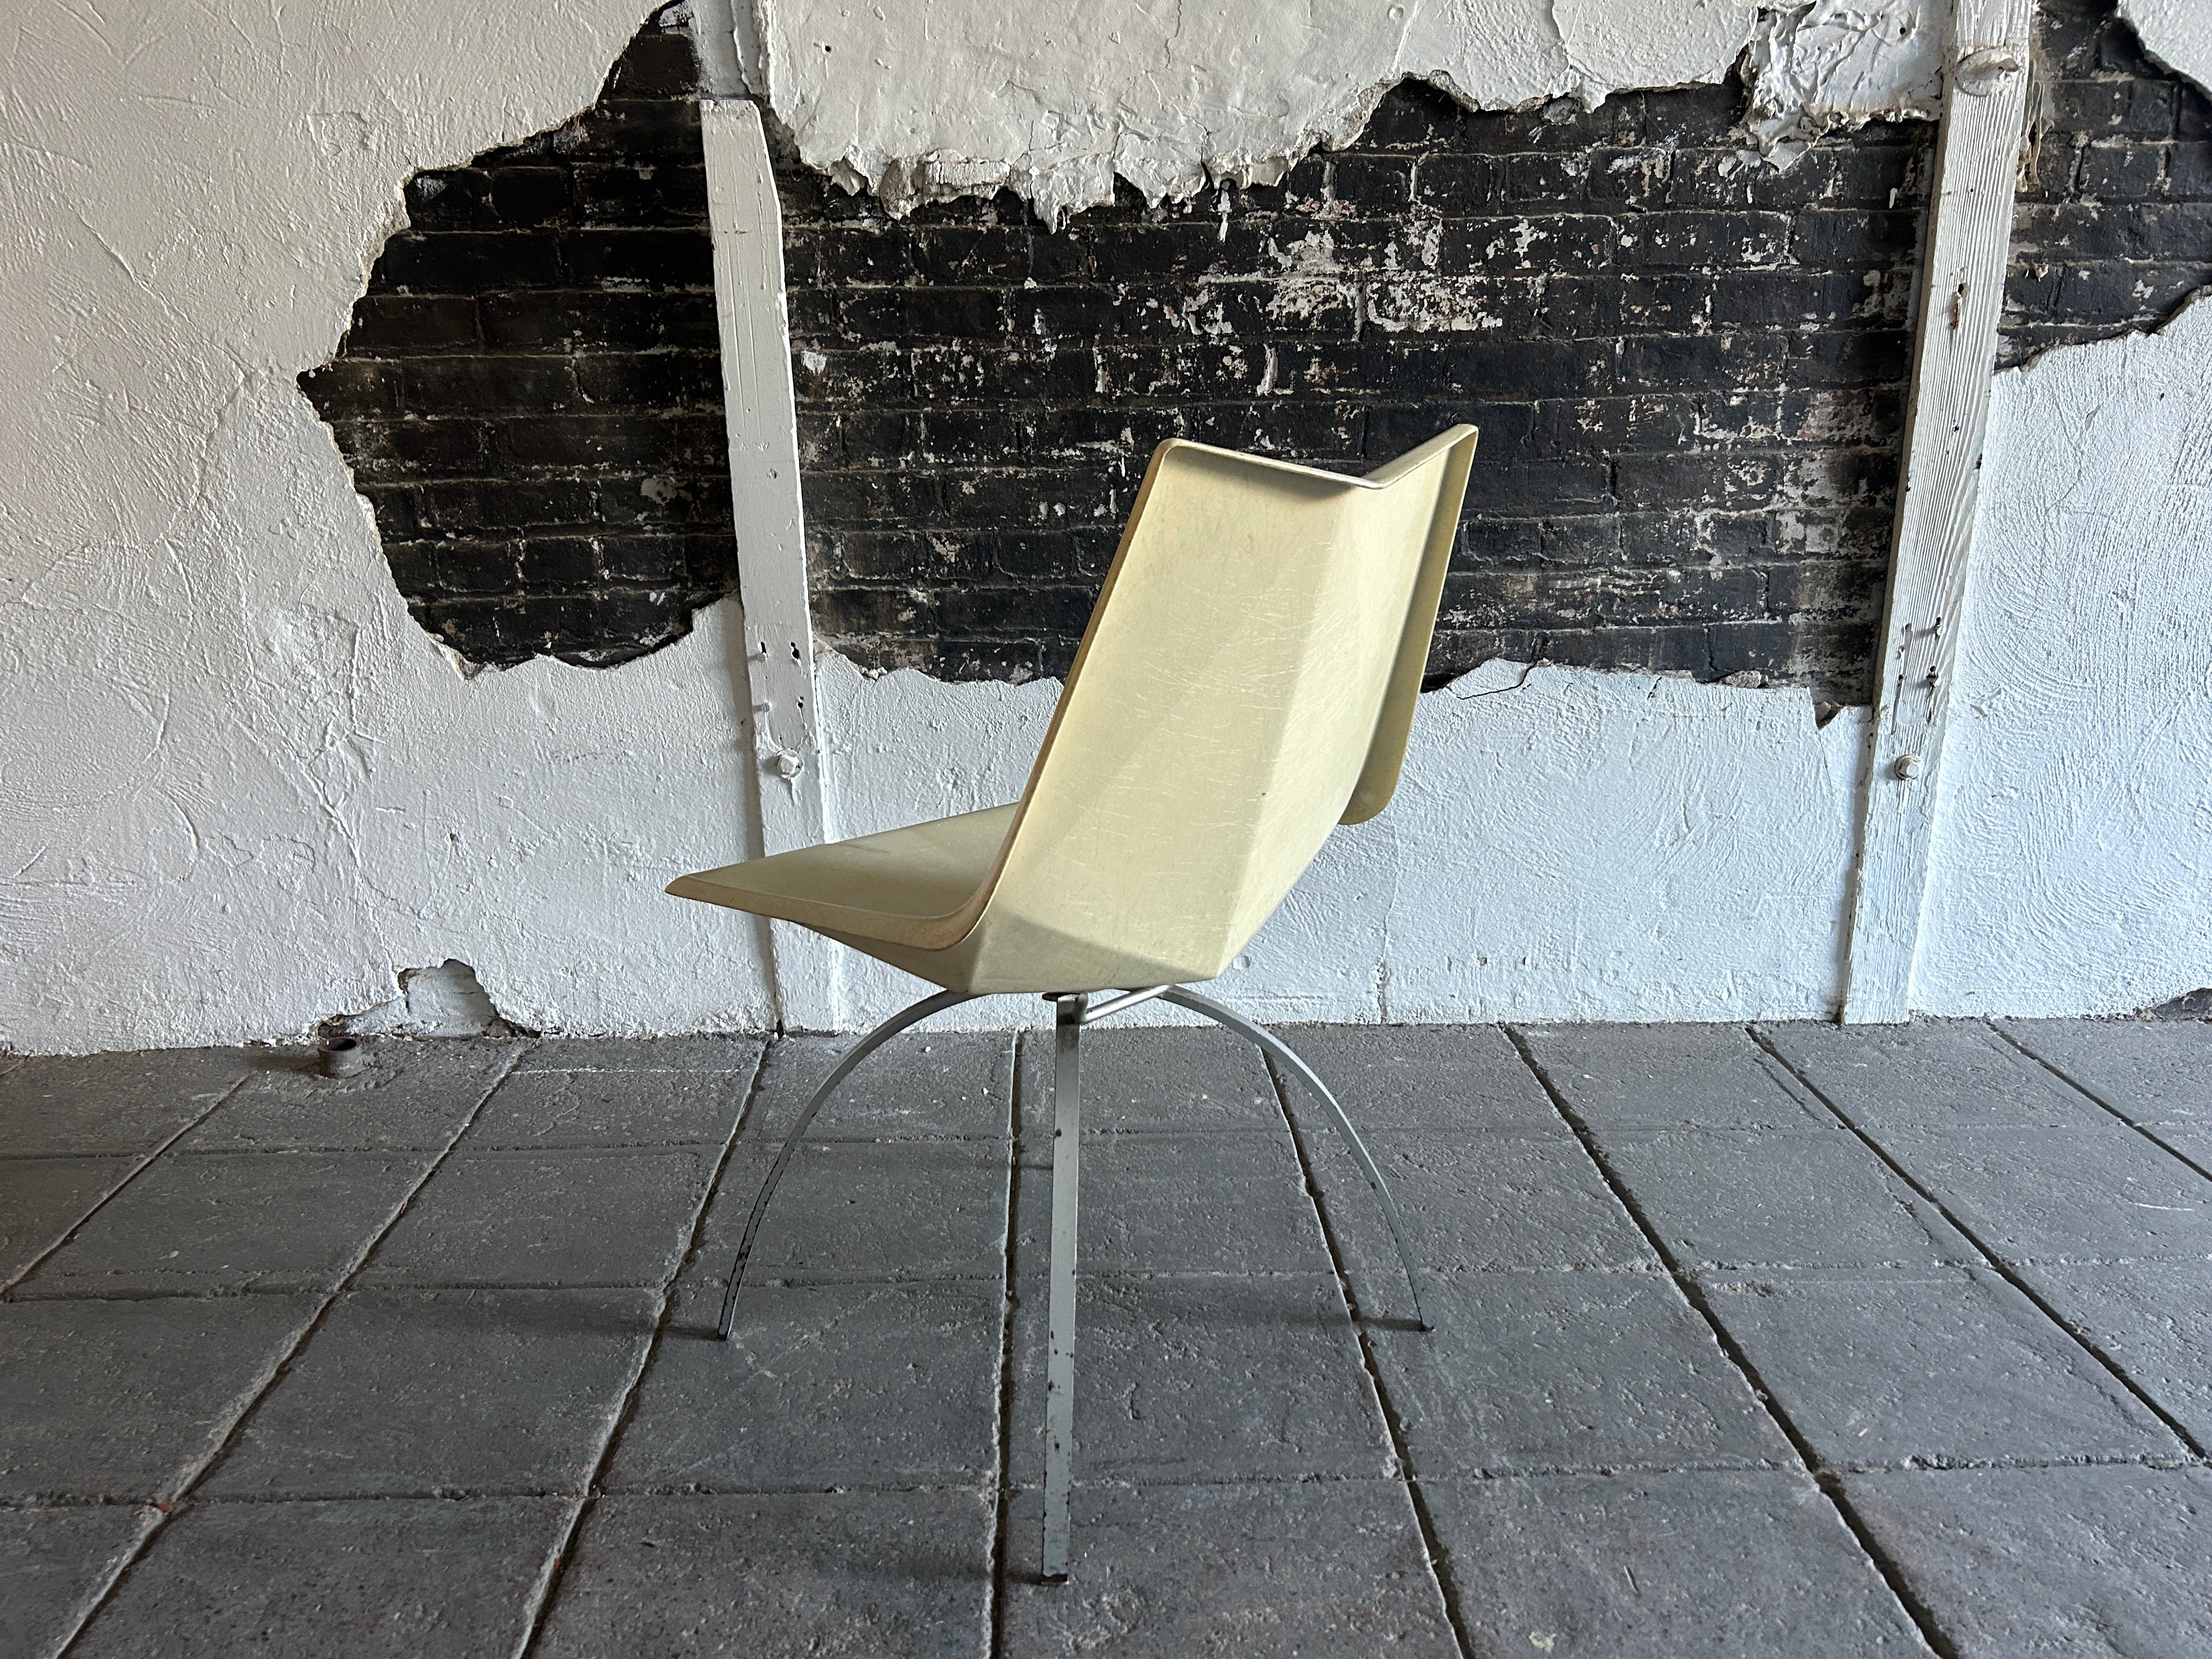 original mid century off white Paul McCobb origami fiberglass shell has steel spider bases. Can be used inside or outside. These side chairs are by Paul McCobb by St. John Seating Corp. New York. Very rare chairs. Located in Brooklyn NYC.

(4)